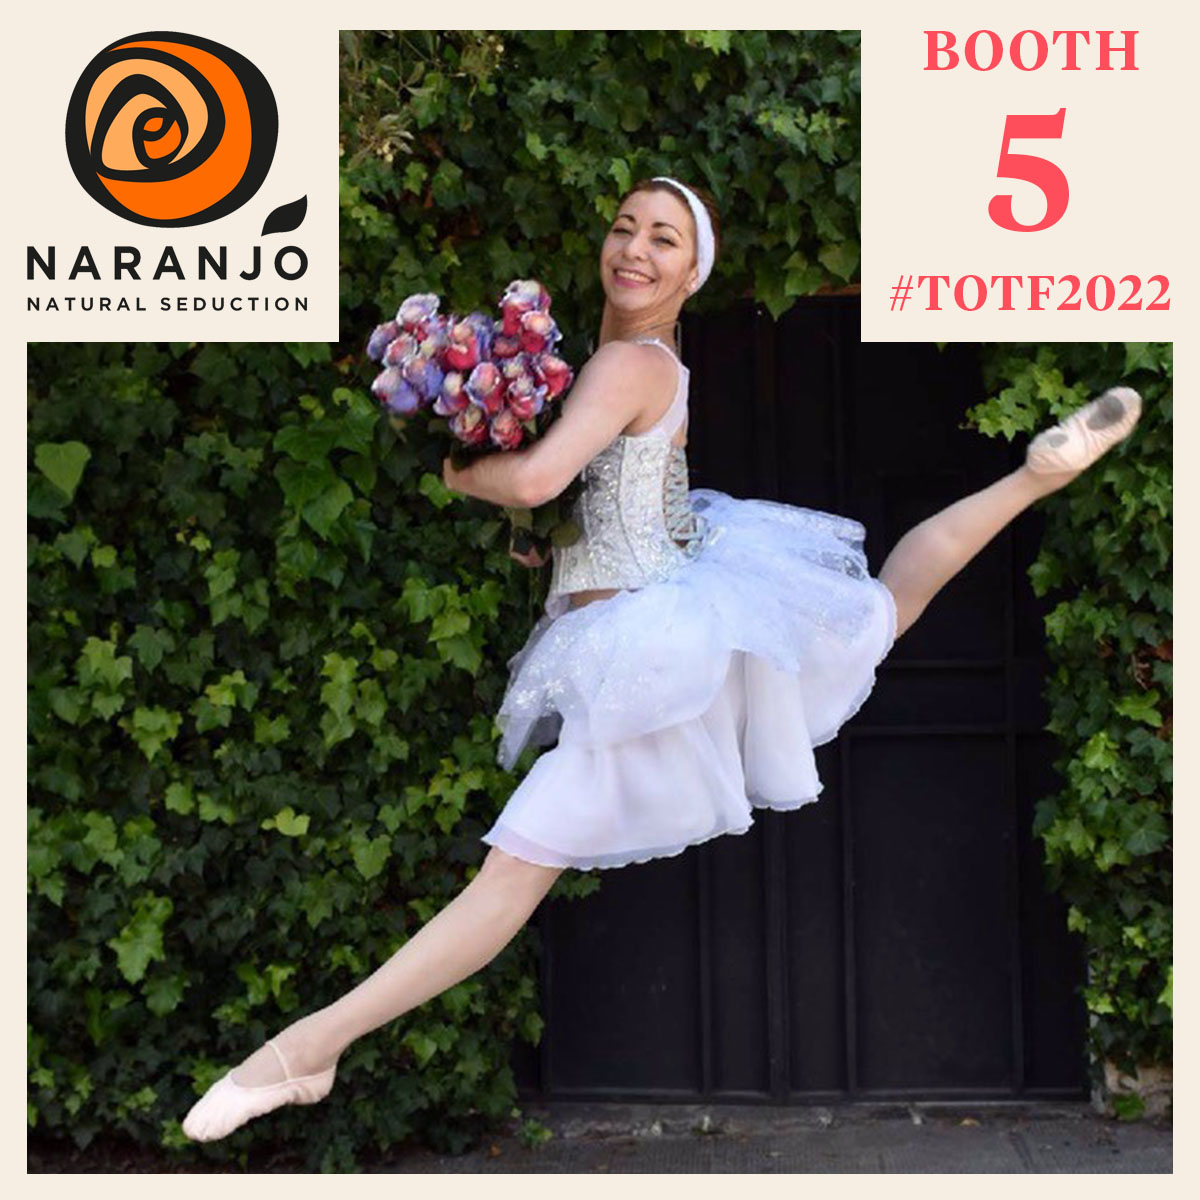 Naranjo Rose Group at #TOTF2022, the Only Online Trade Fair in Floriculture to Present Our Tinted Prestige Collection